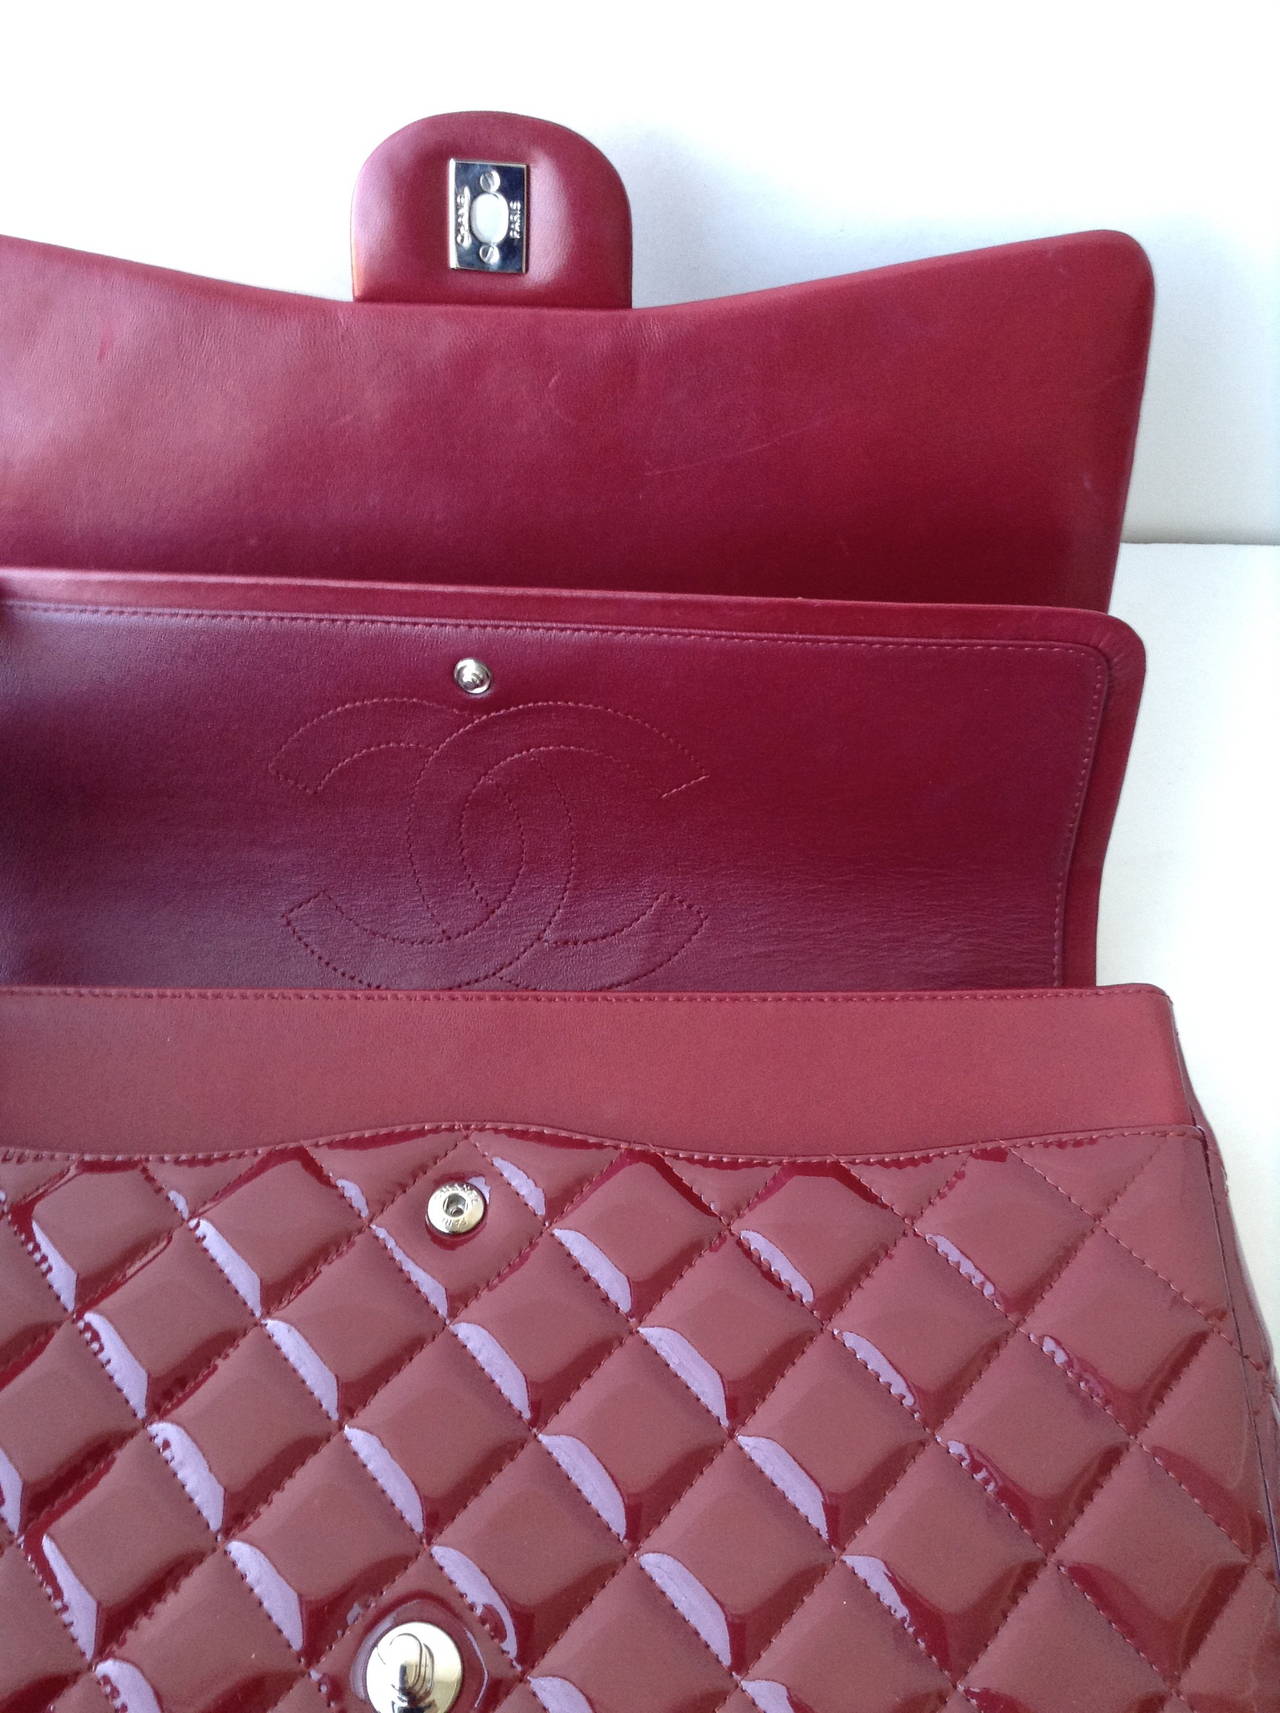 Chanel Patent Wine Red Maxi Double Flap Handbag SHW For Sale 2